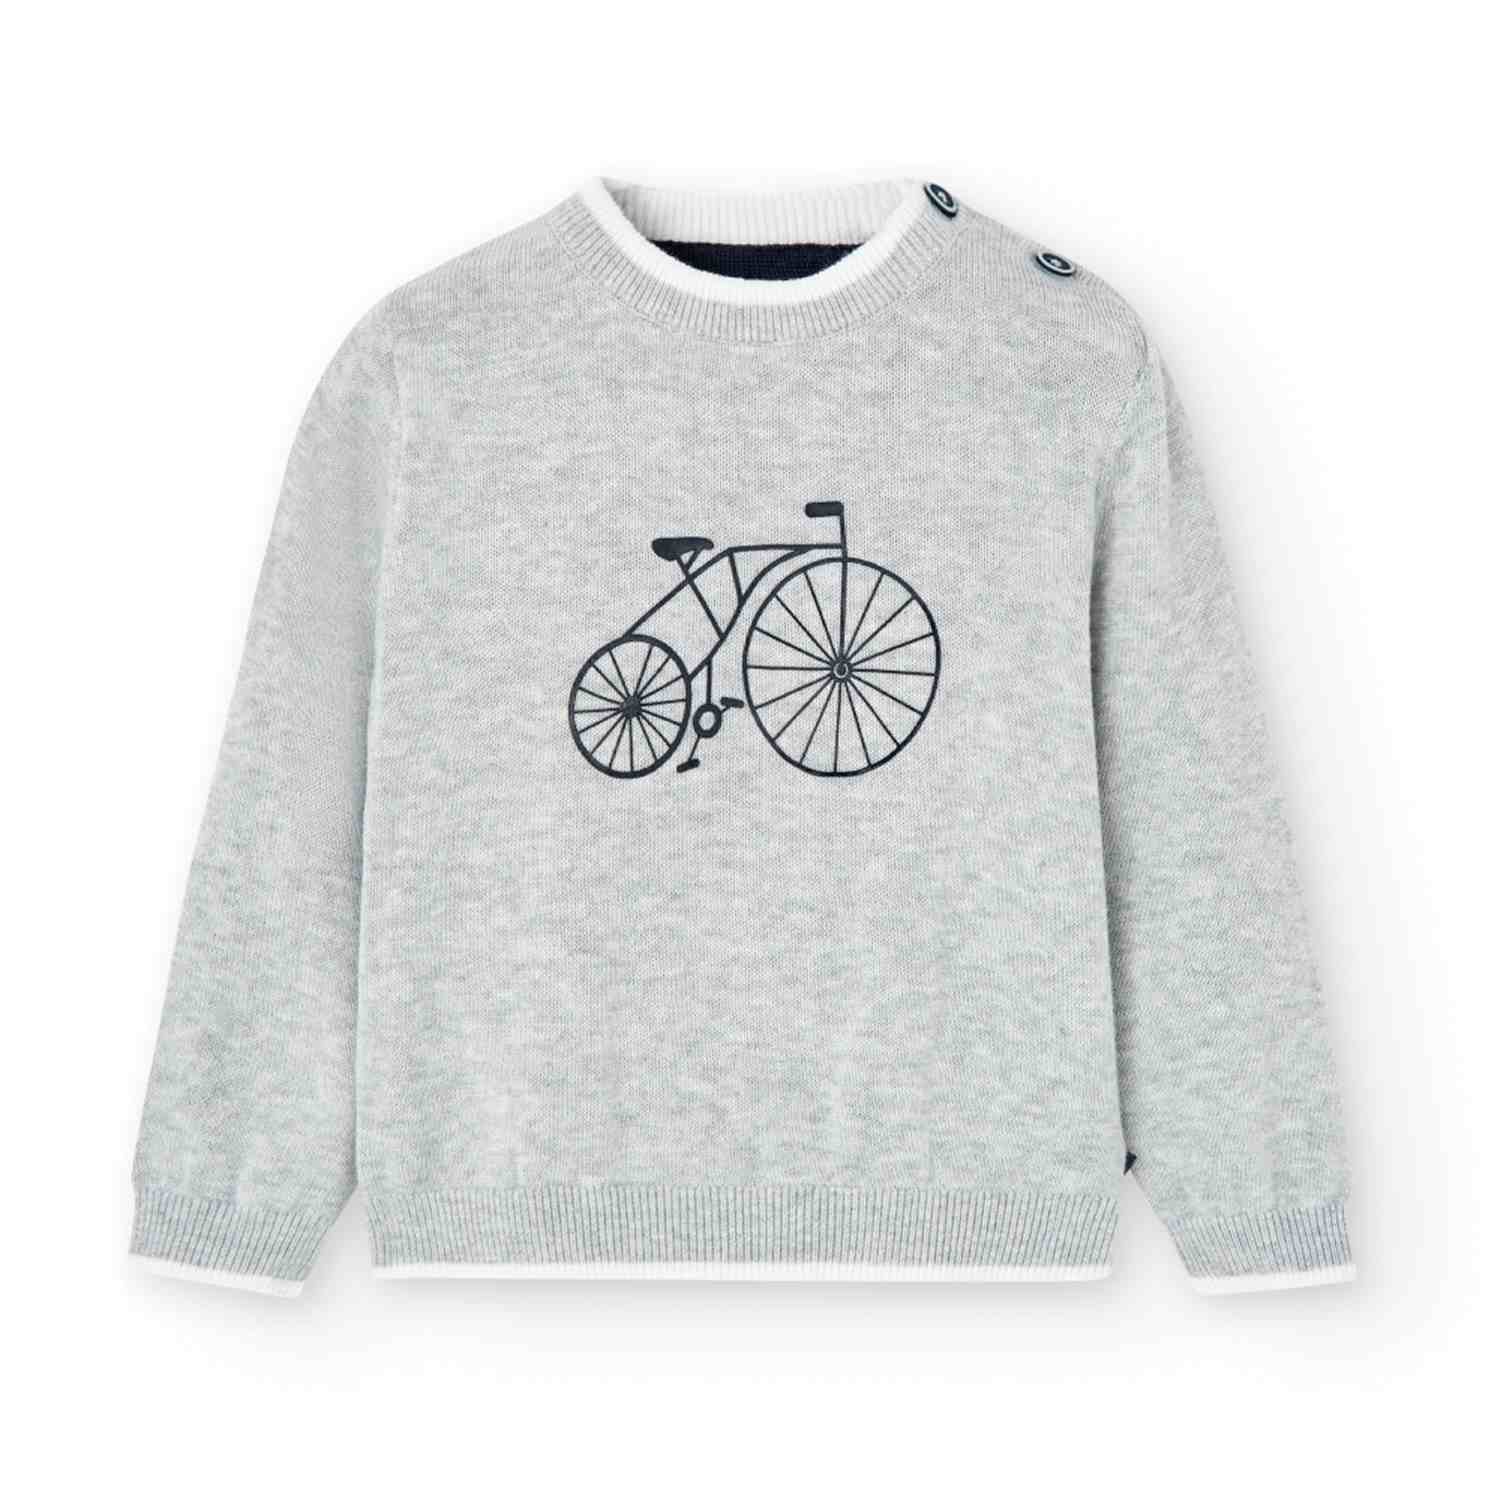 Knitwear pullover "bicycle" for baby